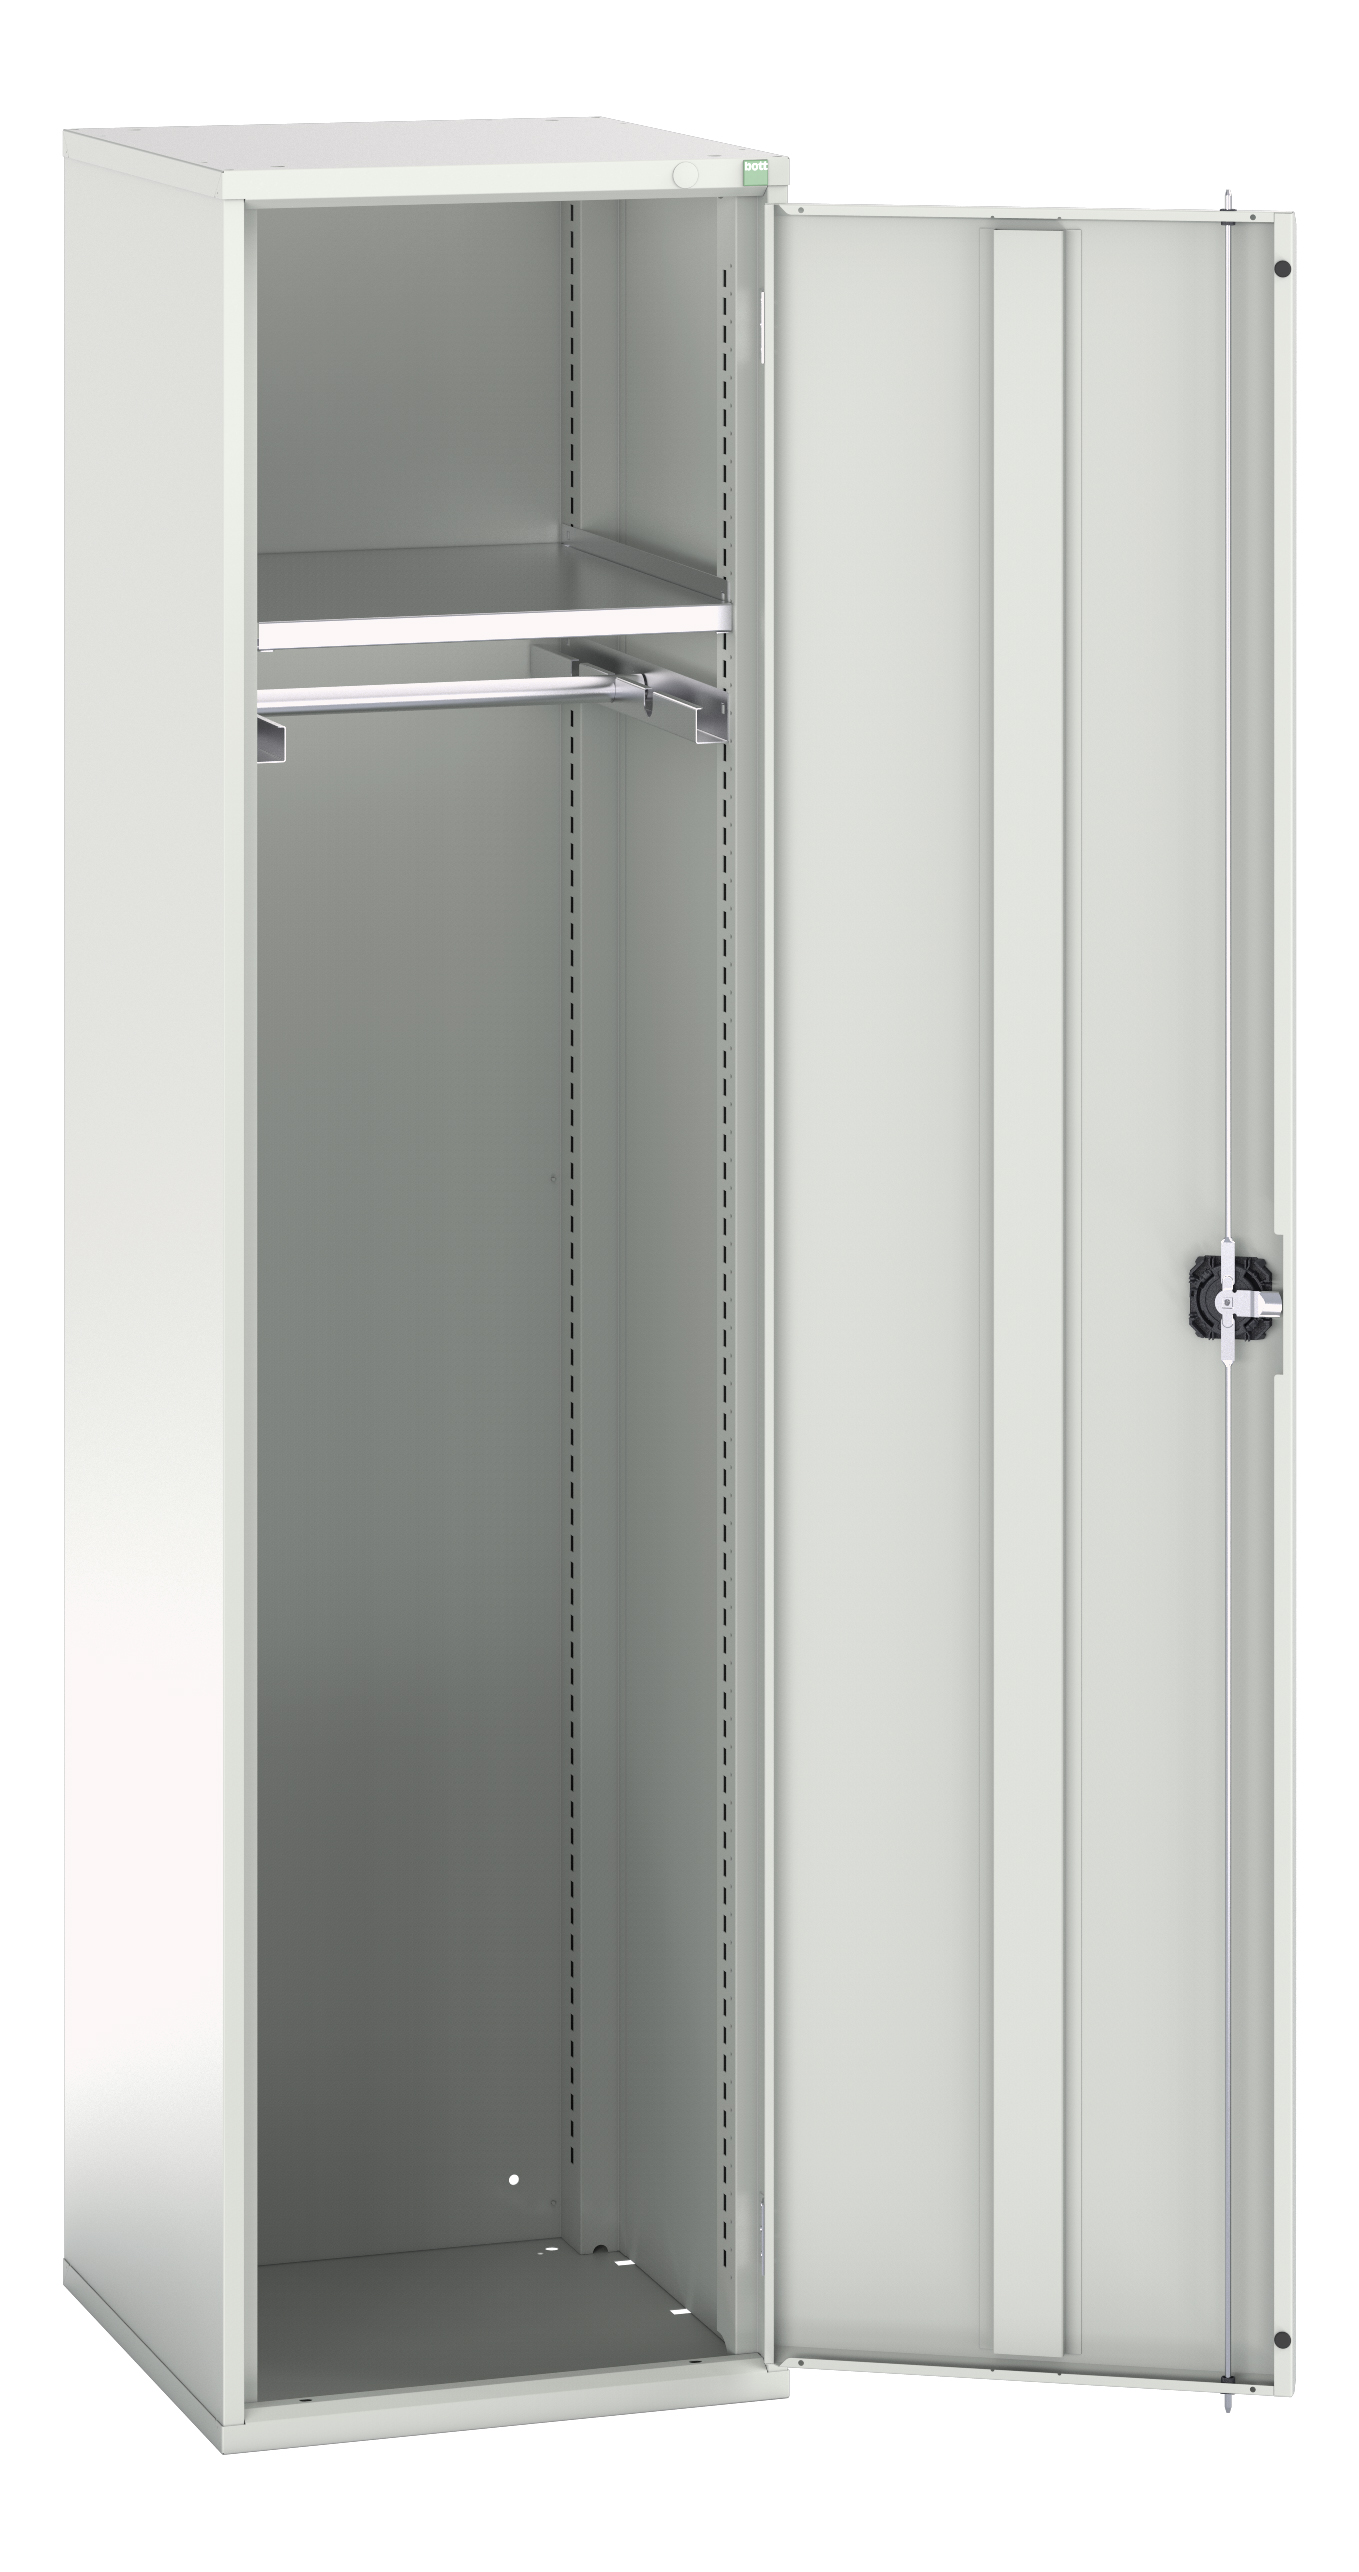 Bott Verso Ppe / Janitorial Kitted Cupboard - 16926350.16